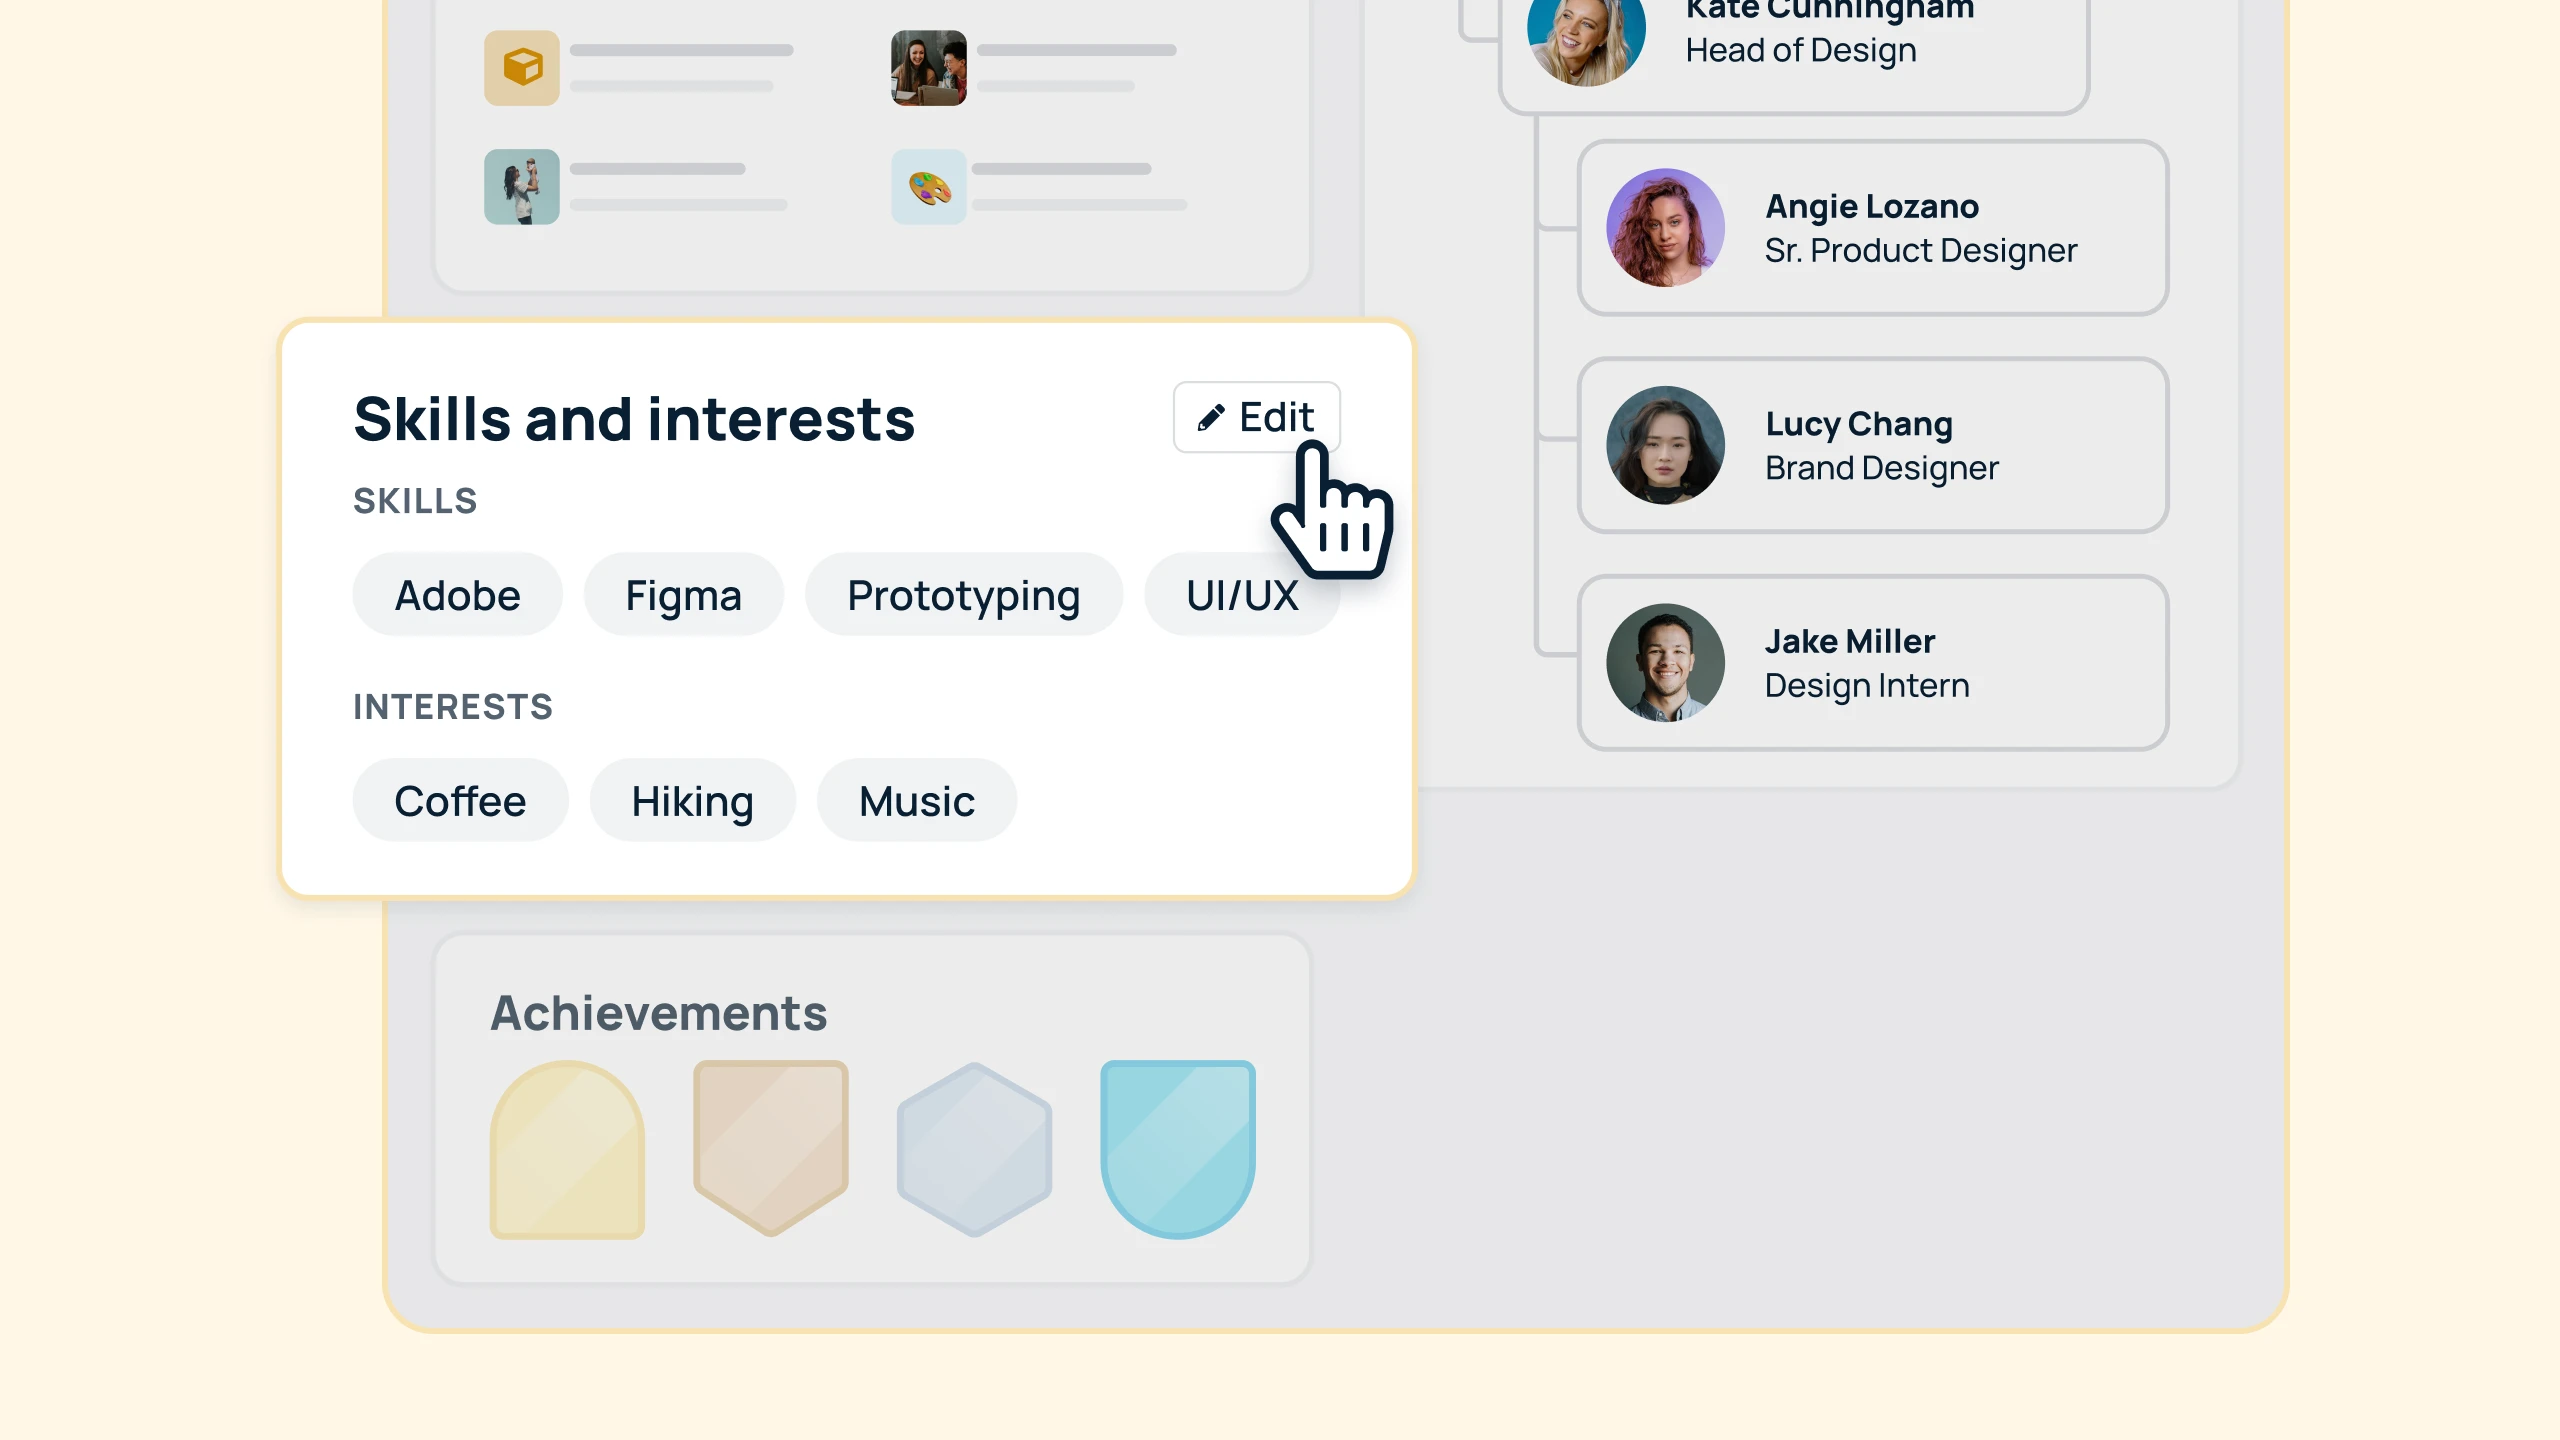 GoProfiles for Employee Engagement: Interactive video walkthrough of the GoProfiles Skills and Interests feature